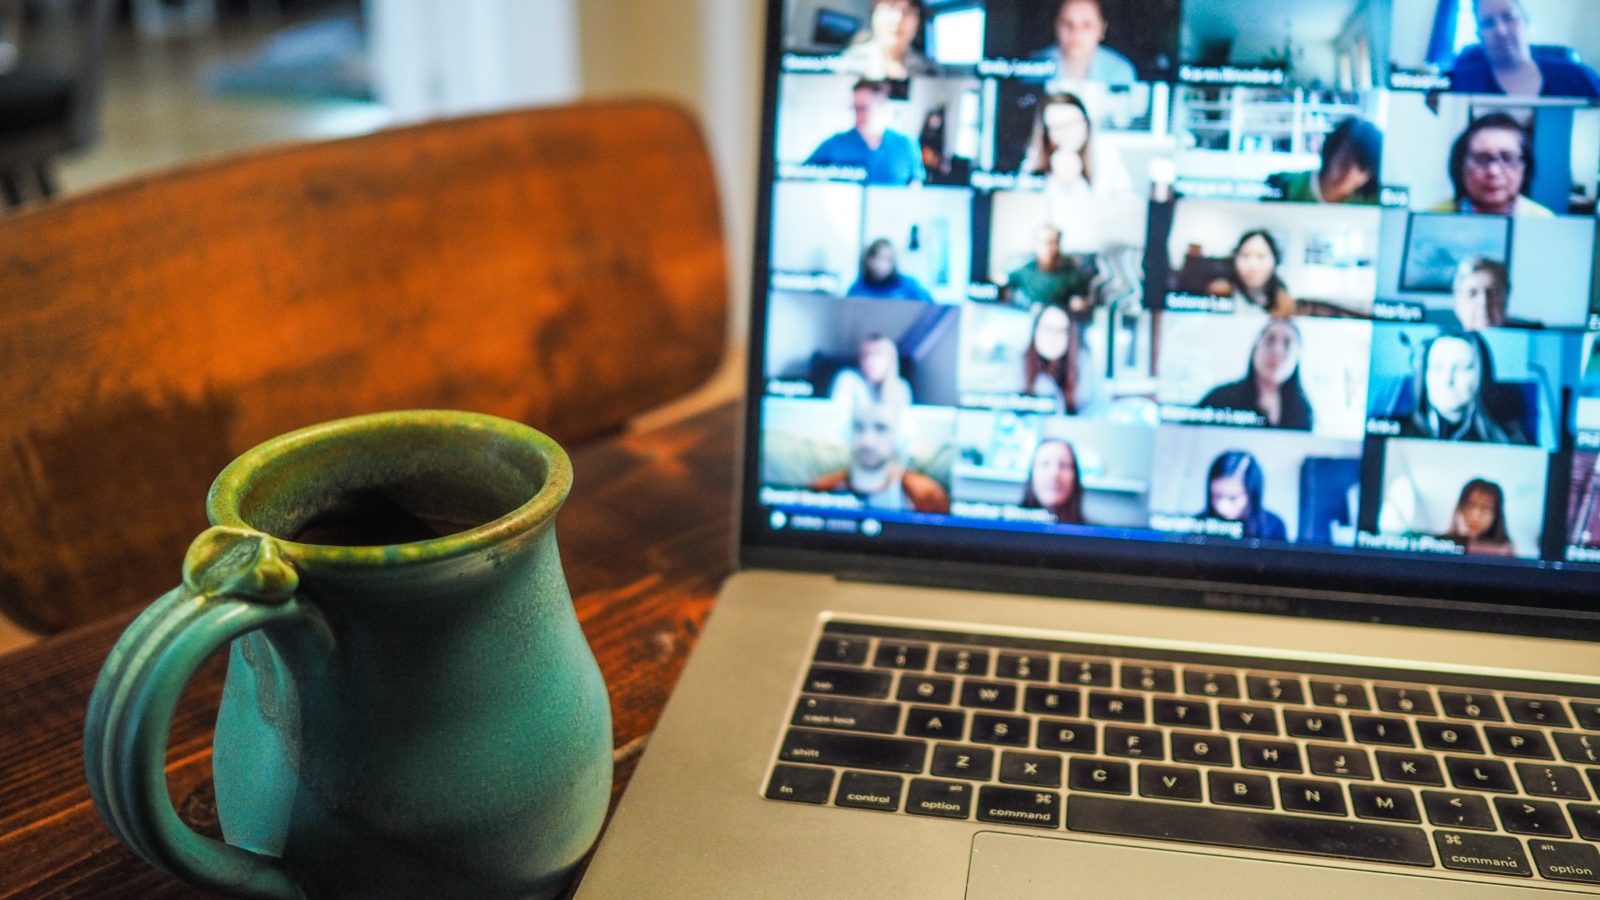 Livestreams with program leaders or beneficiaries can be good online fundraising ideas for nonprofits to engage donors. In this image, a coffee mug sits next to an open laptop that's displaying an online meeting with the different participants each appear in their own tile.